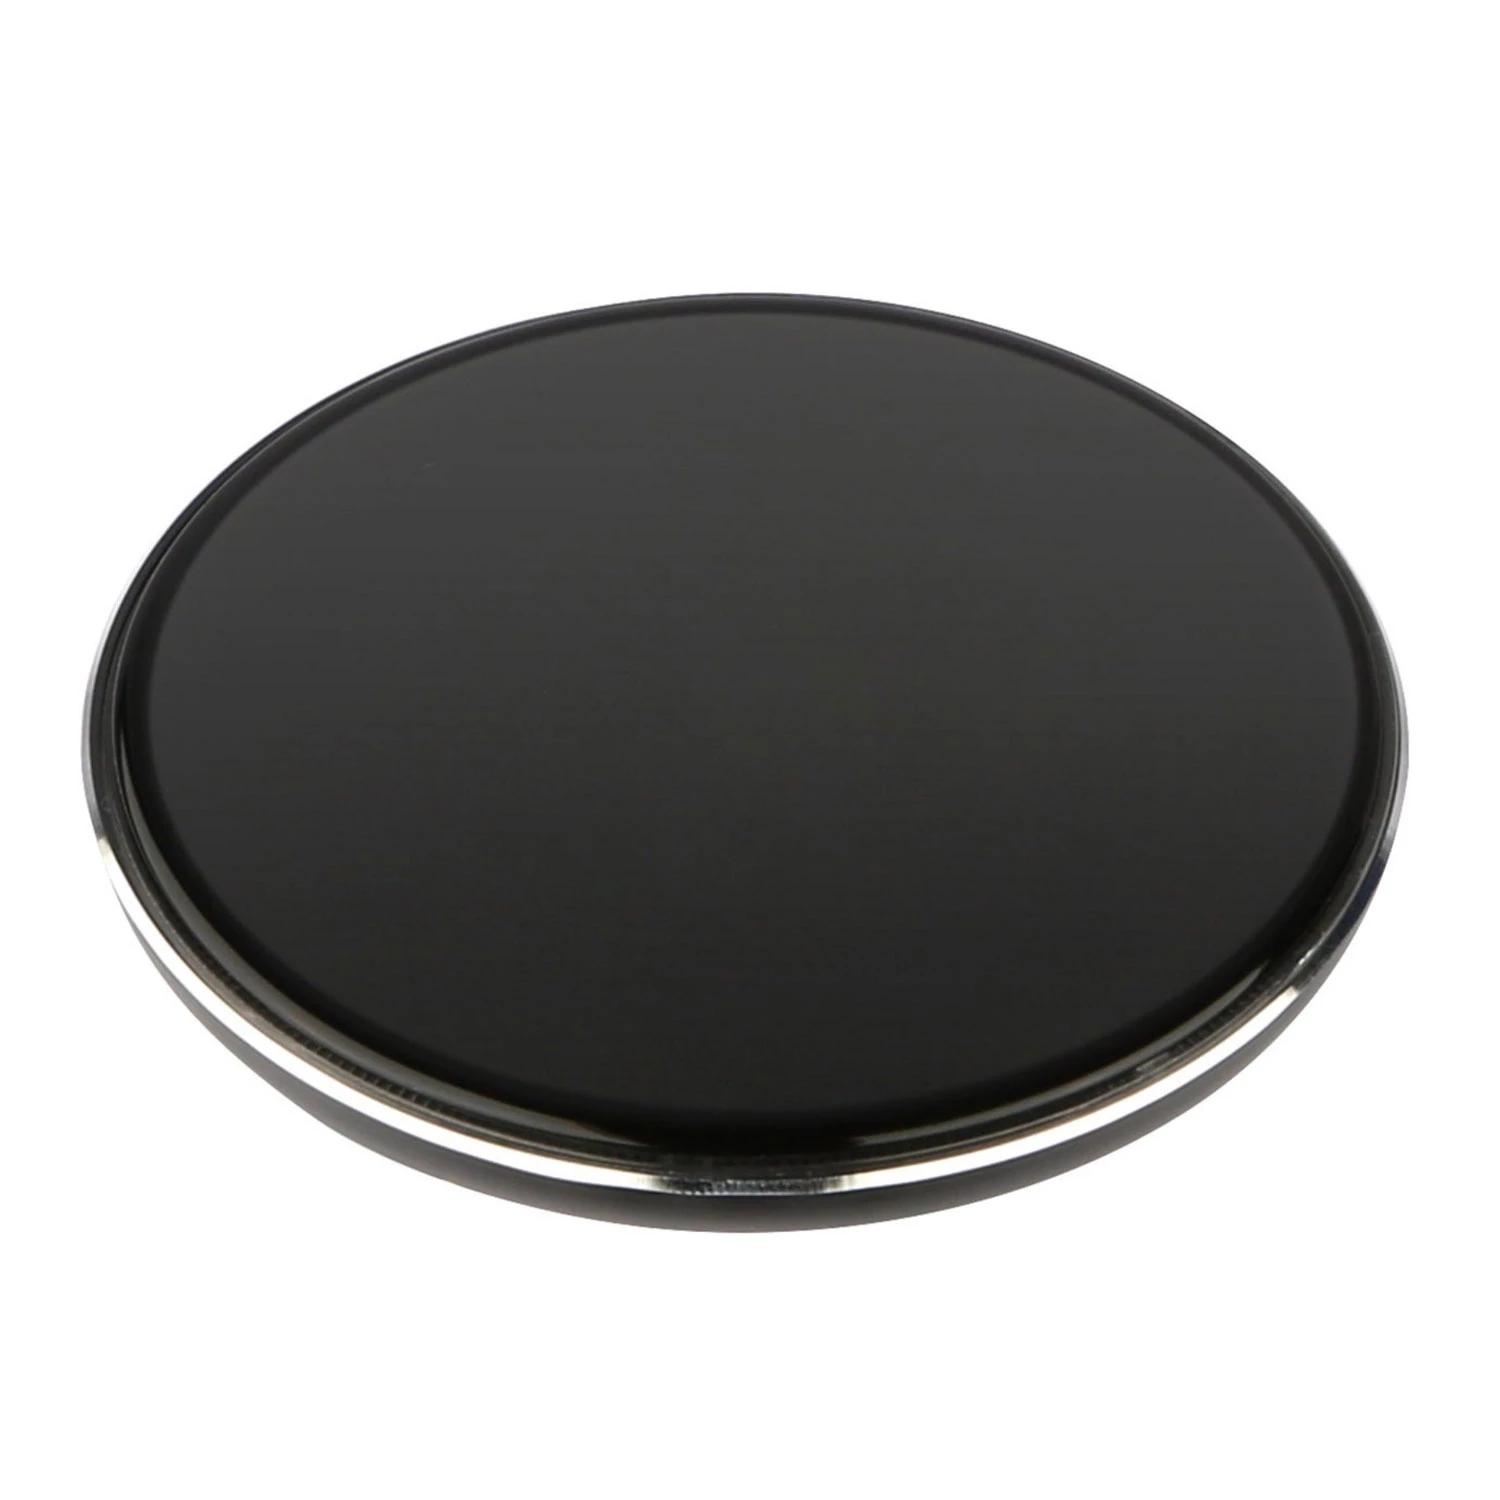 Qi-Certified Ultra-Slim 5W Wireless Charger for iPhone XS MAX/XR/XS/X/8/8+, Galaxy S10/S9/S8+, S7